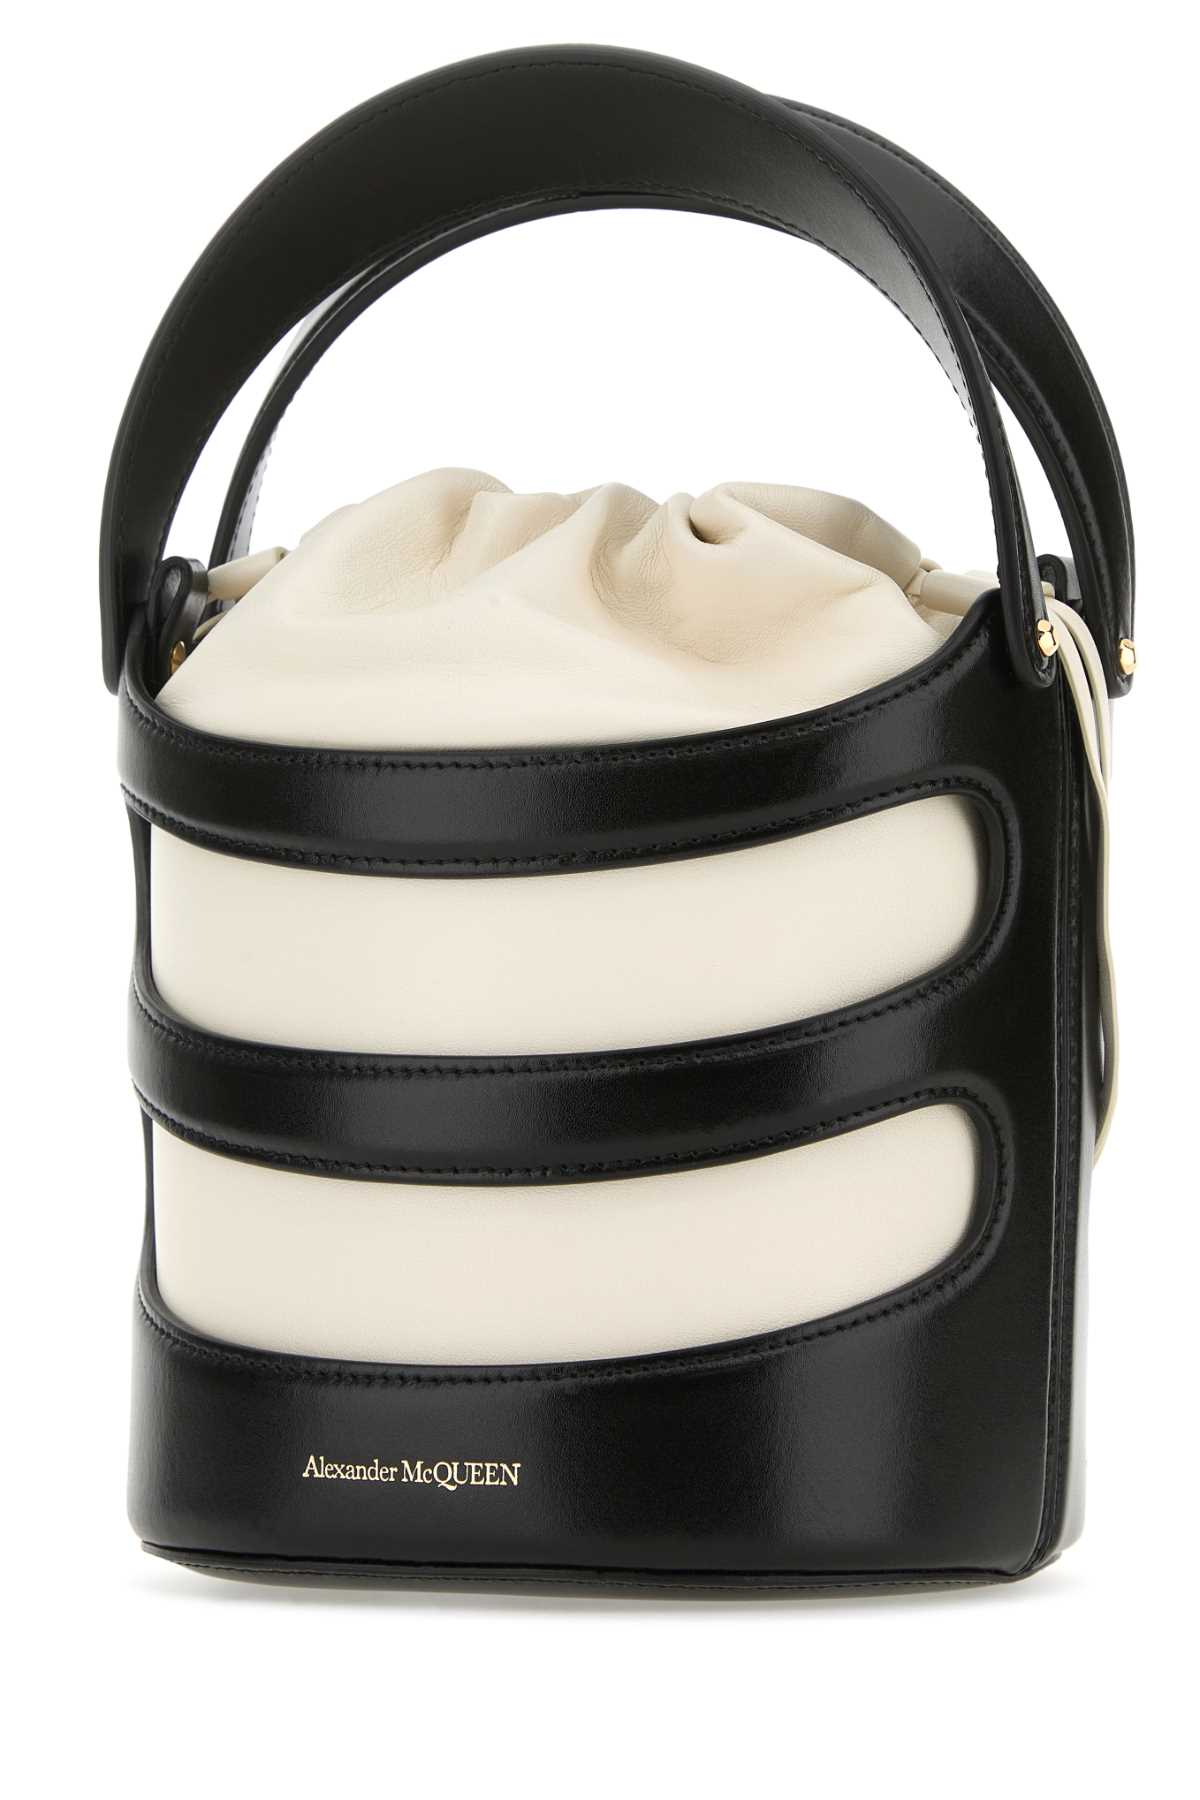 Alexander Mcqueen Two-tone Leather The Rise Bucket Bag In Blacksoftivory